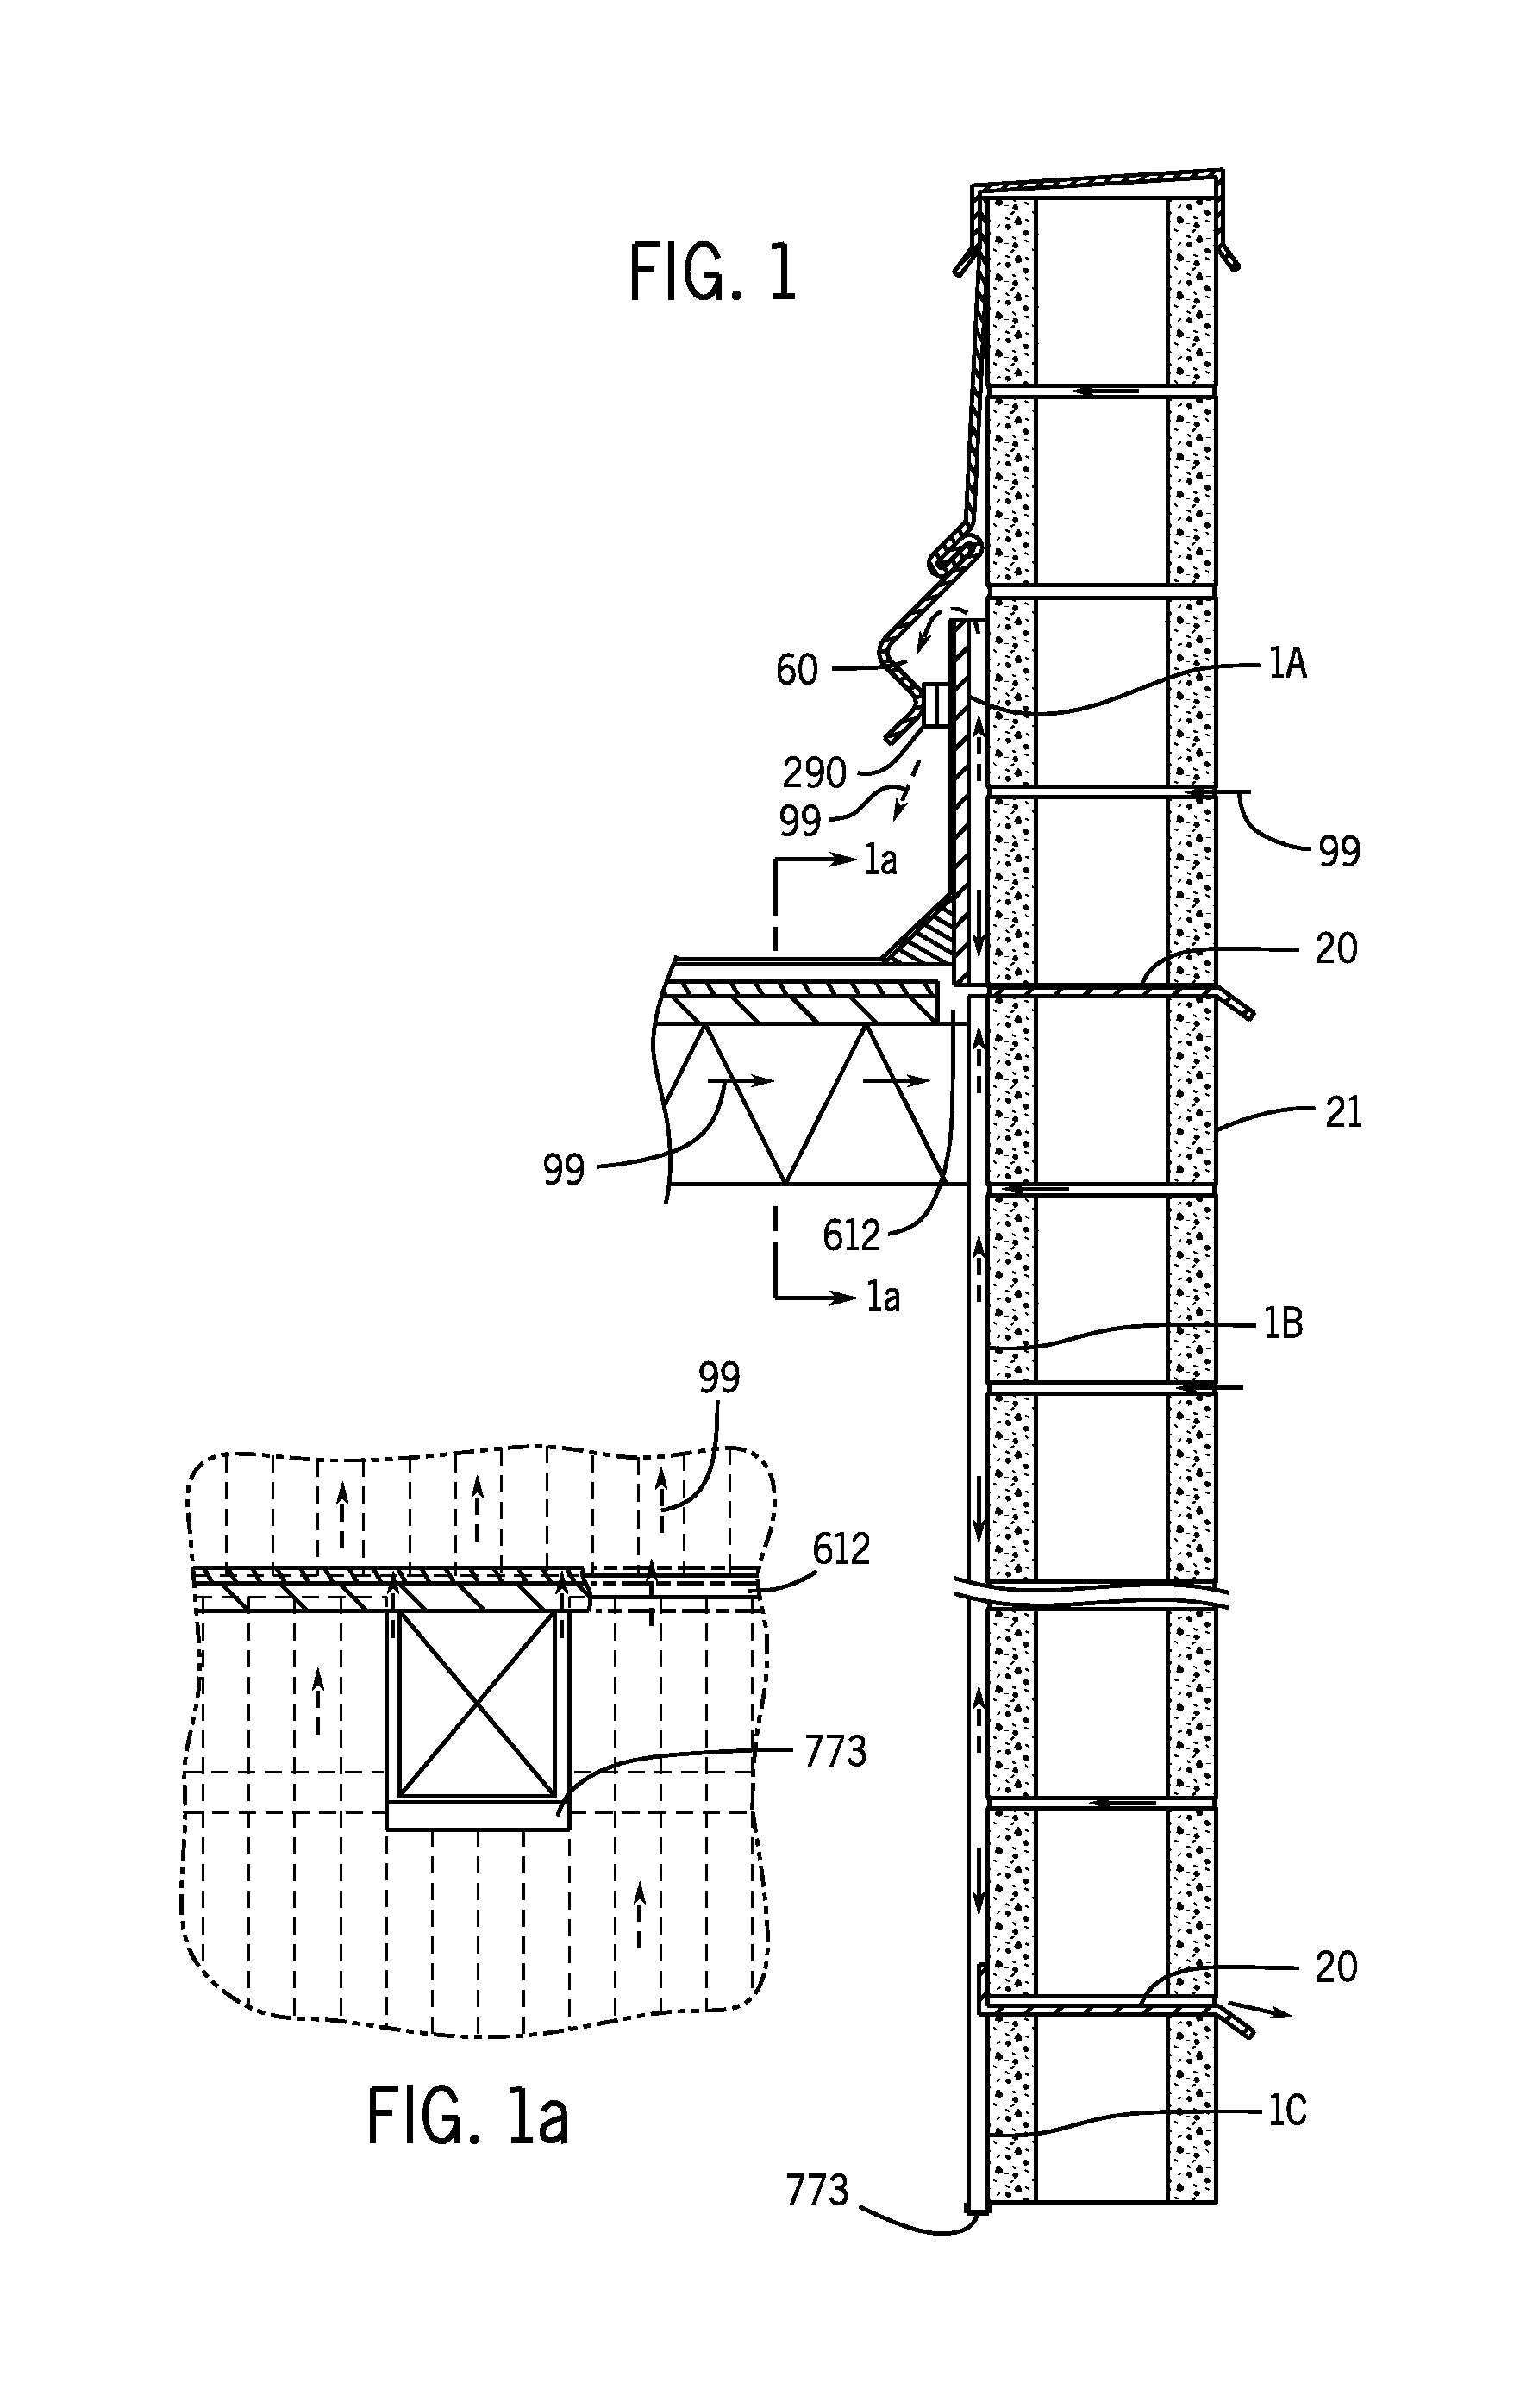 Construction device for releasing moisture from a building